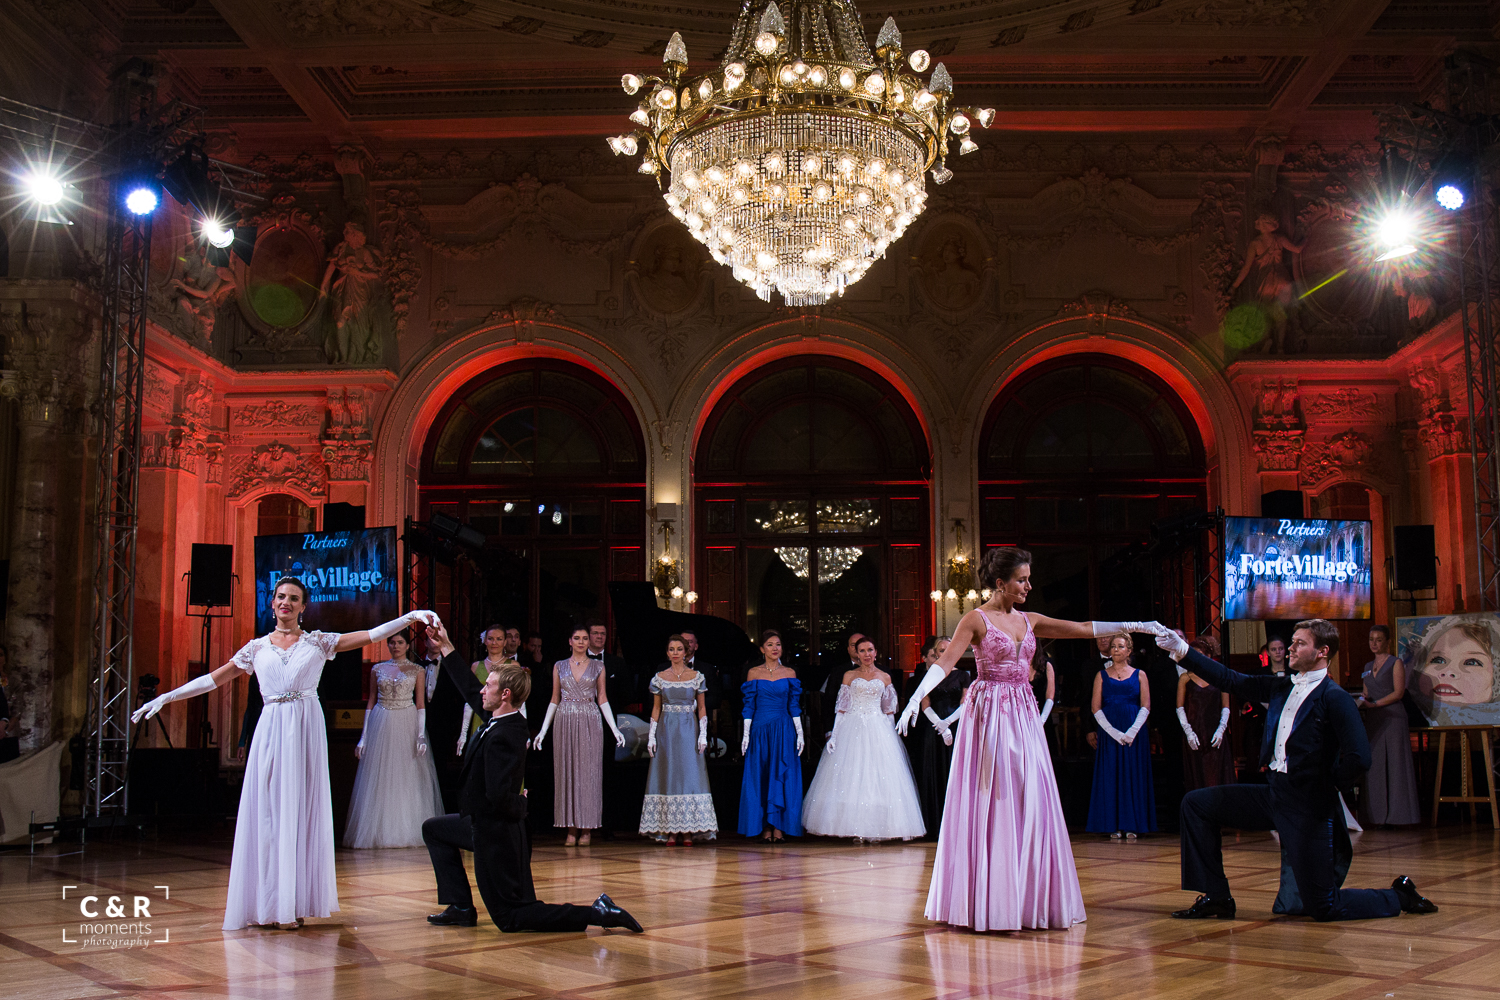 photography-lausanne-vaud-swiss-events-treasures-of-russia-grand-charity-ball-107.jpg